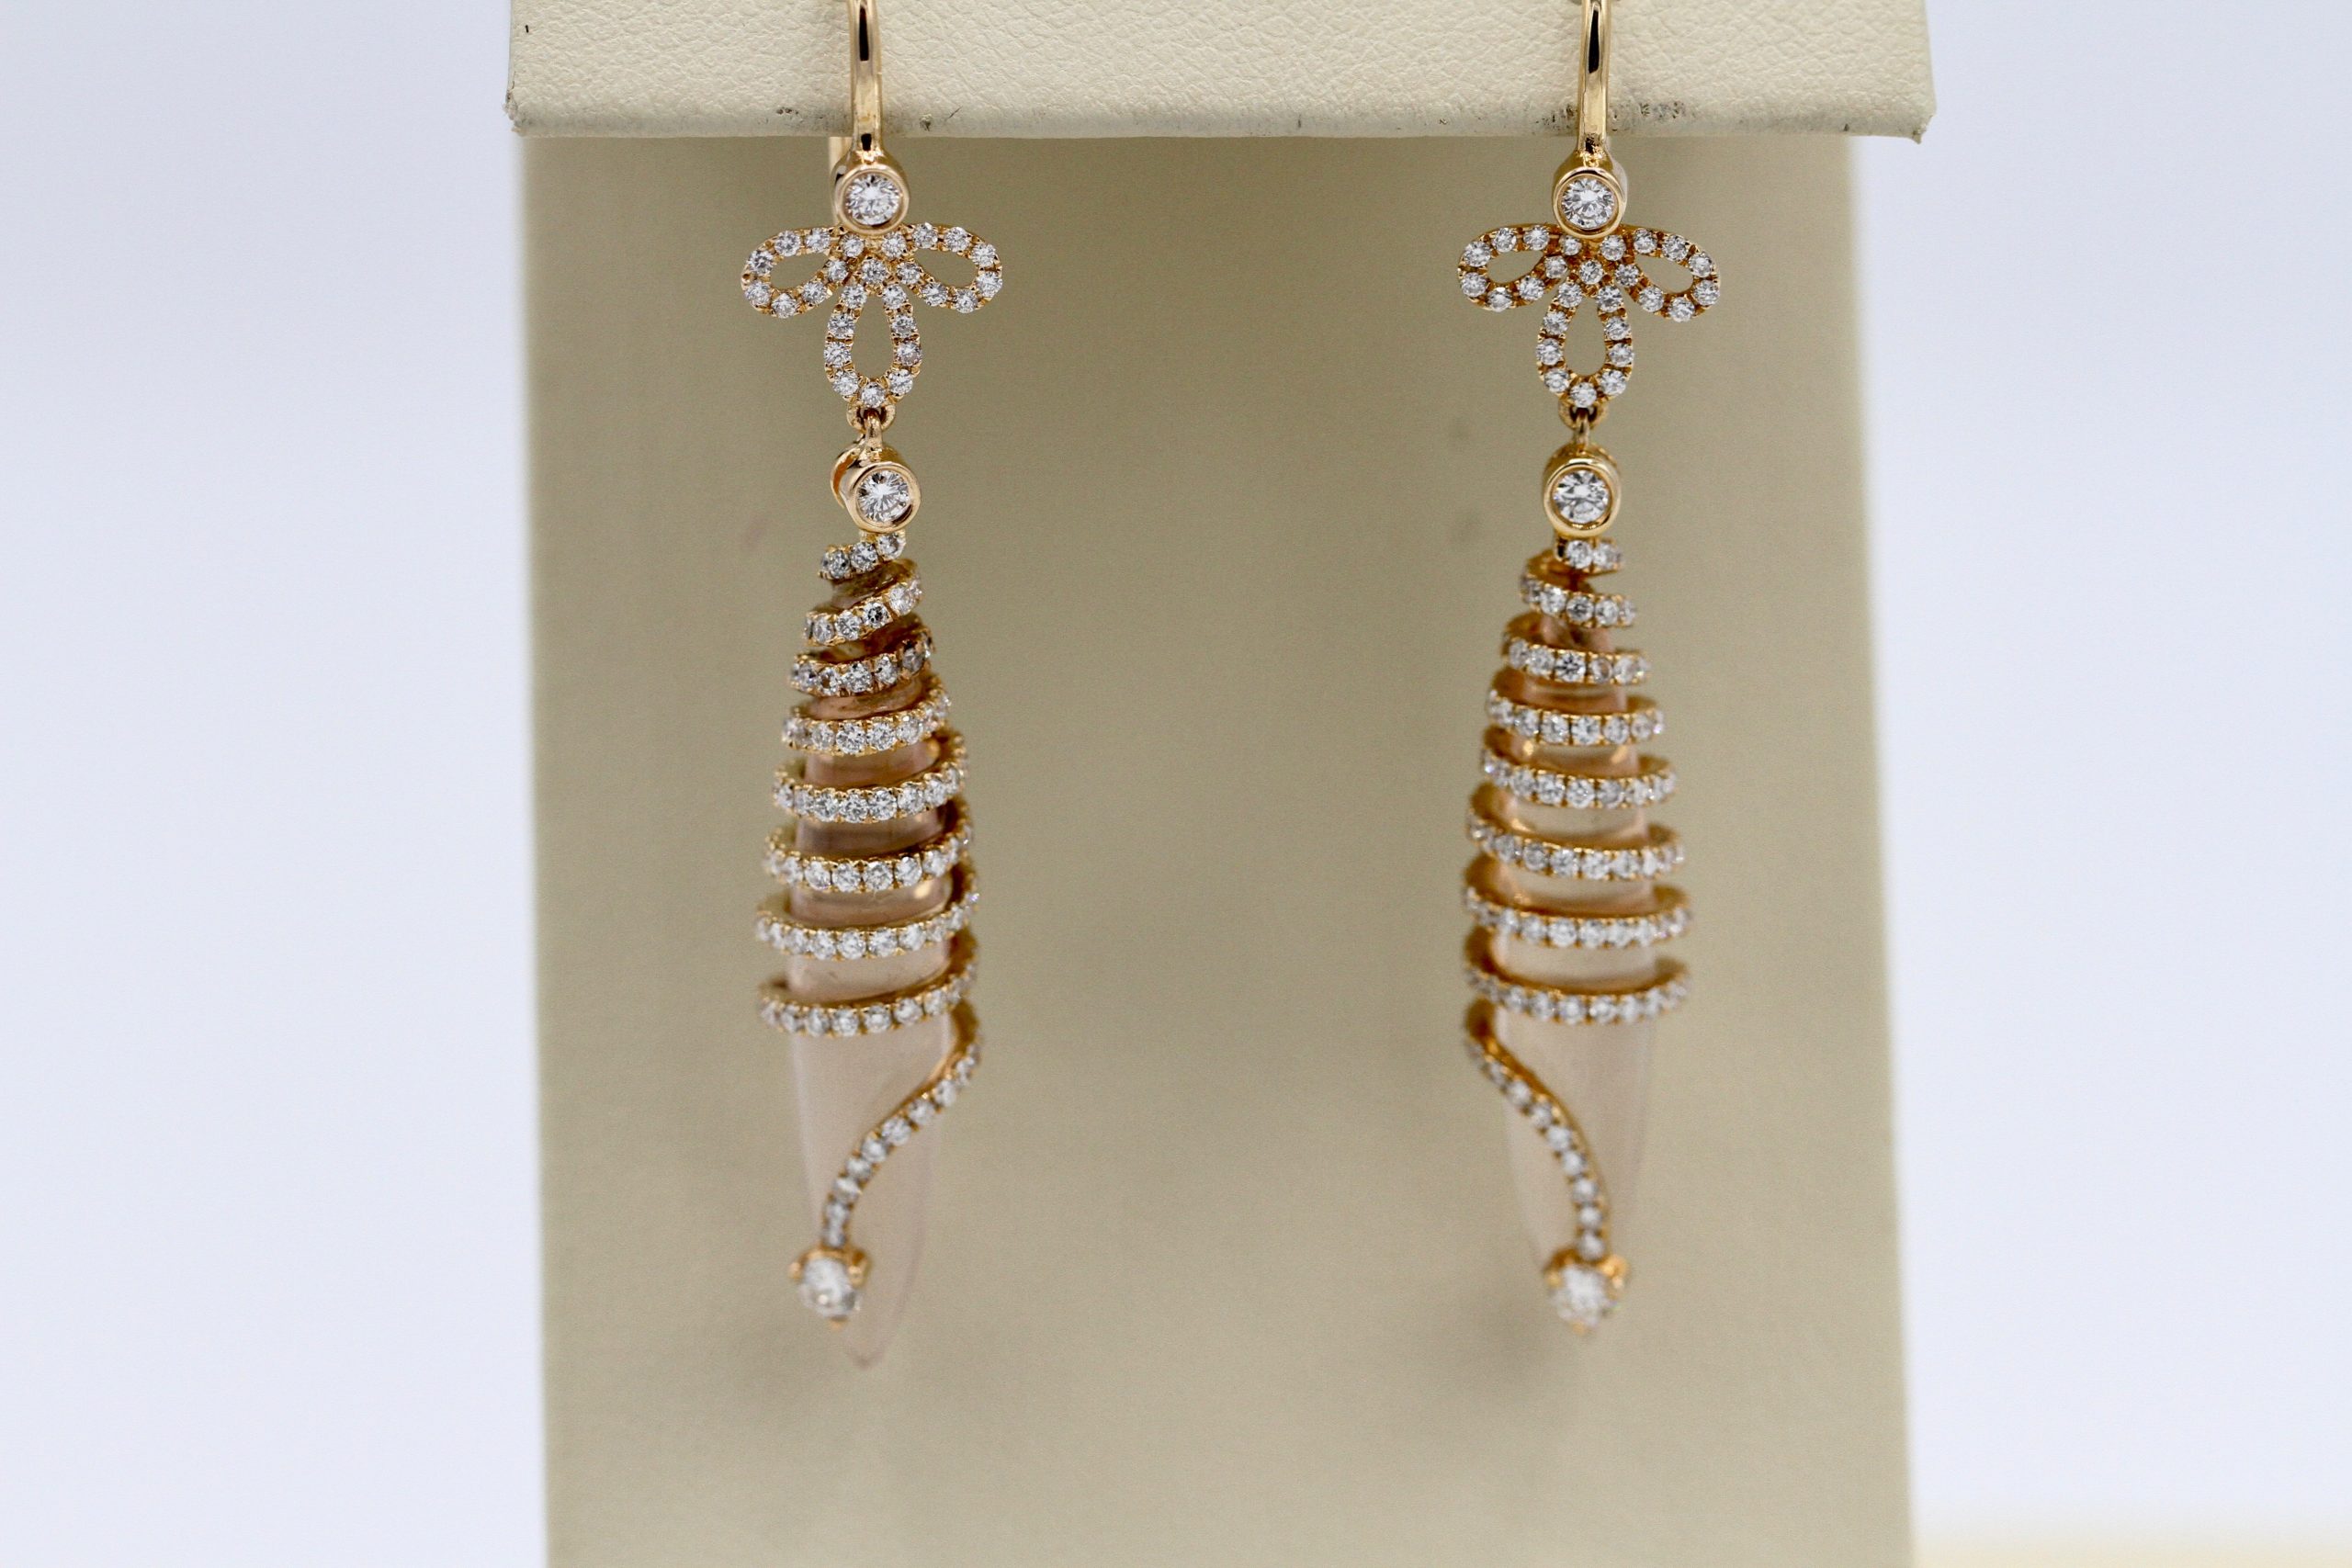 Spiral earrings with inlaid diamond